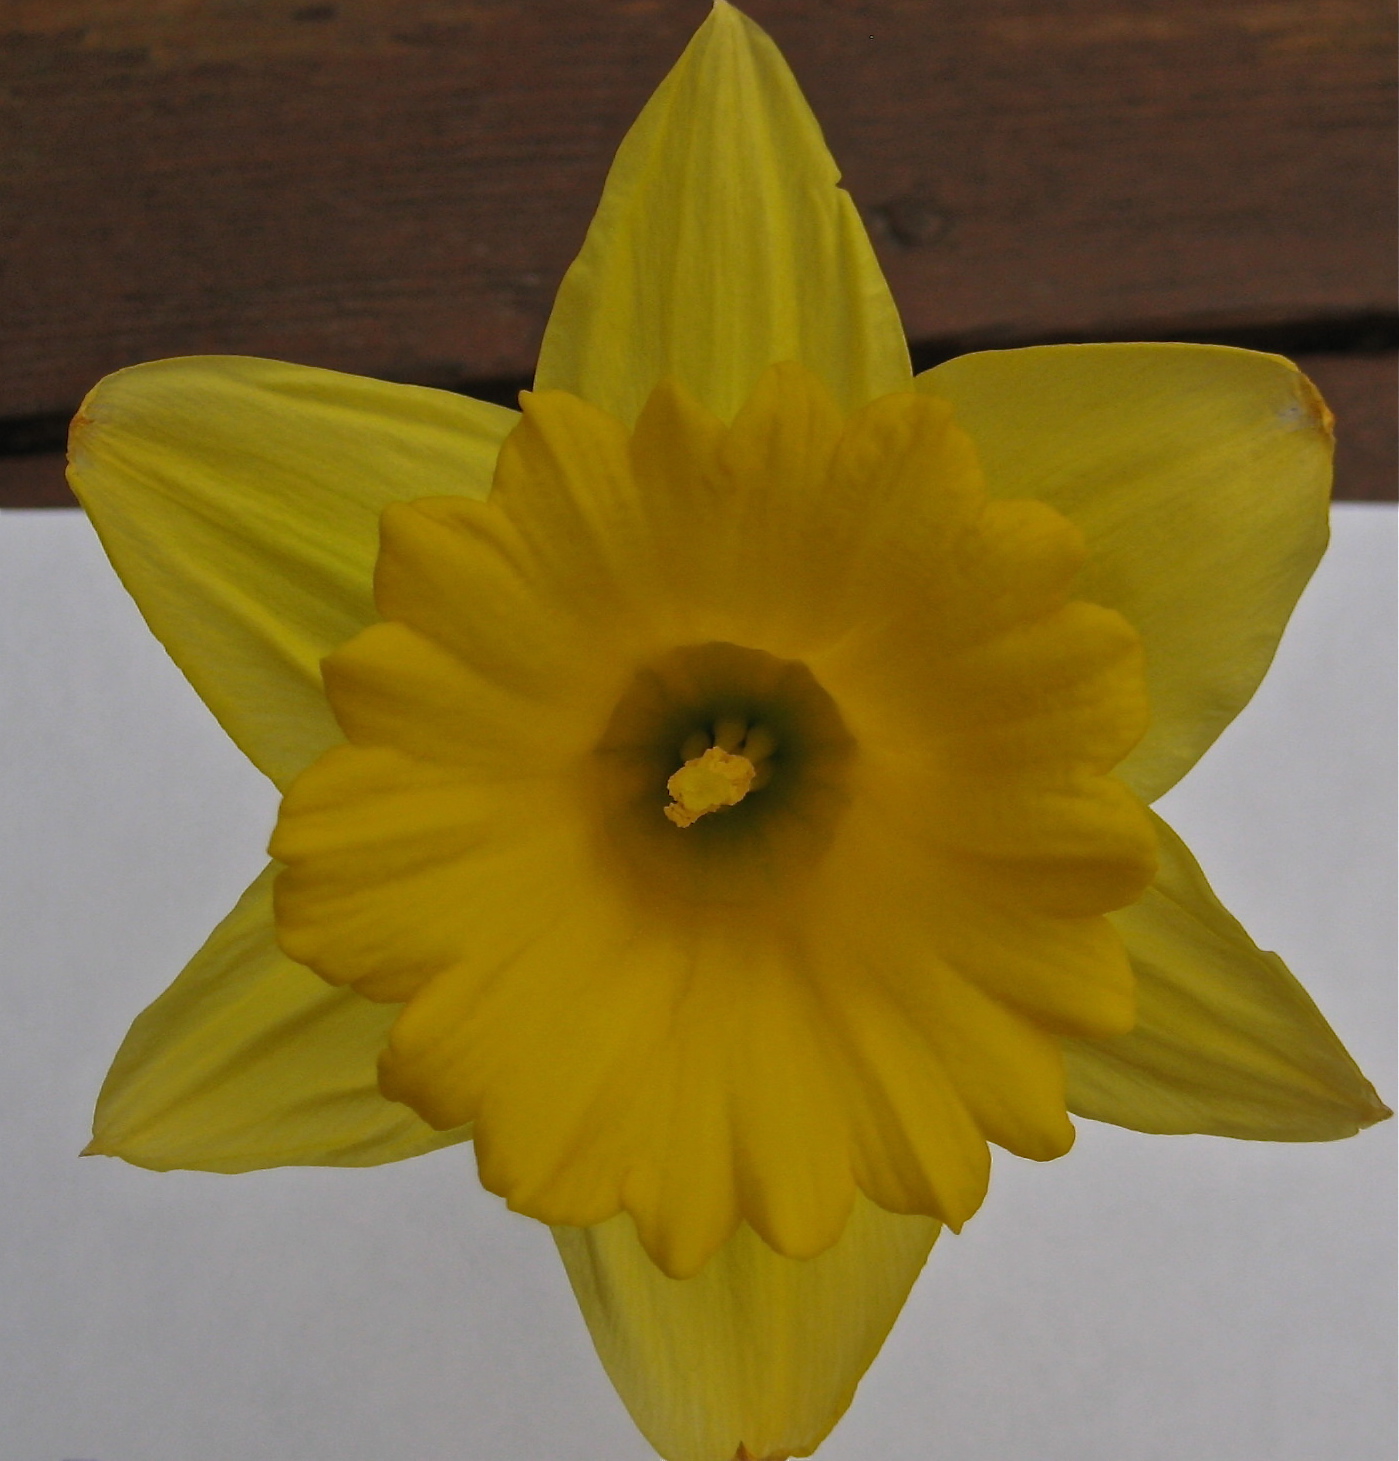 April 1: Fourteen Ways of Looking at a Daffodil